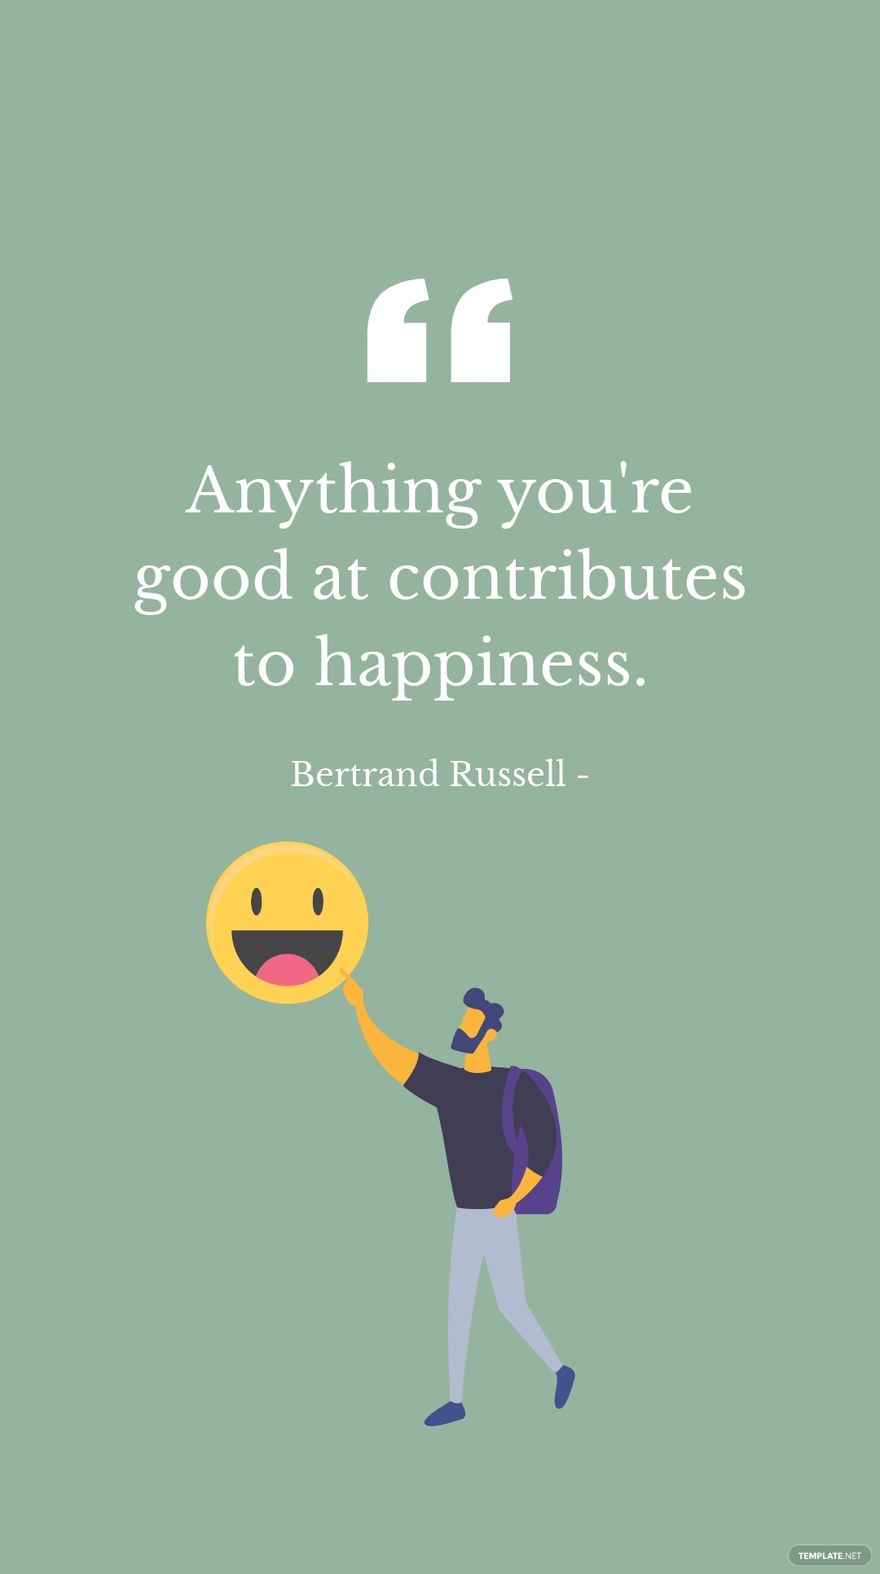 Bertrand Russell - Anything you're good at contributes to happiness.